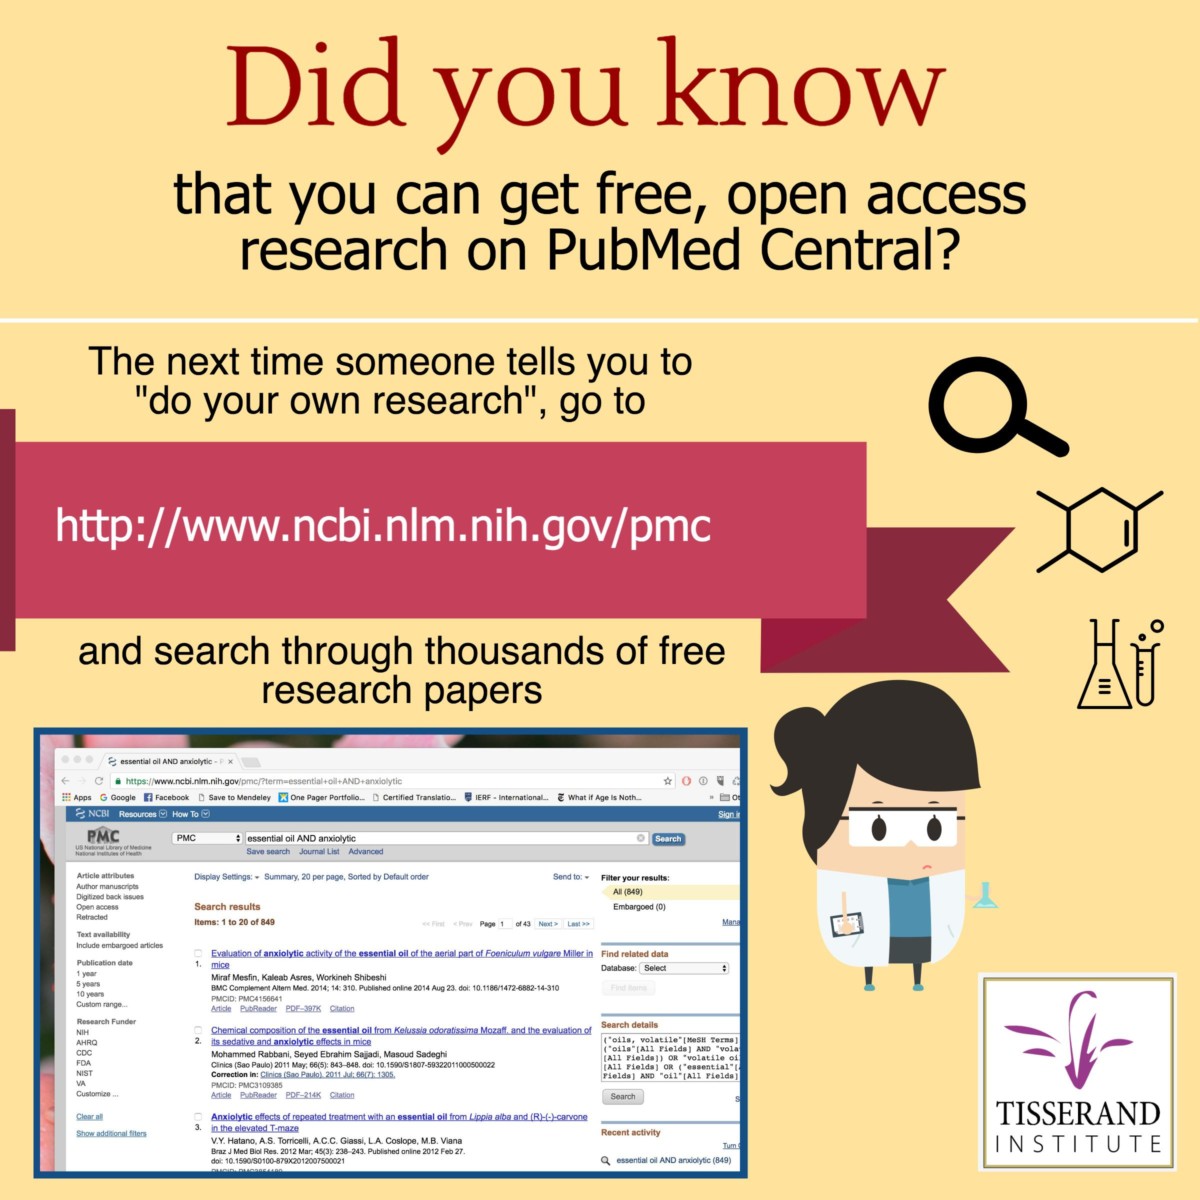 open access to research papers